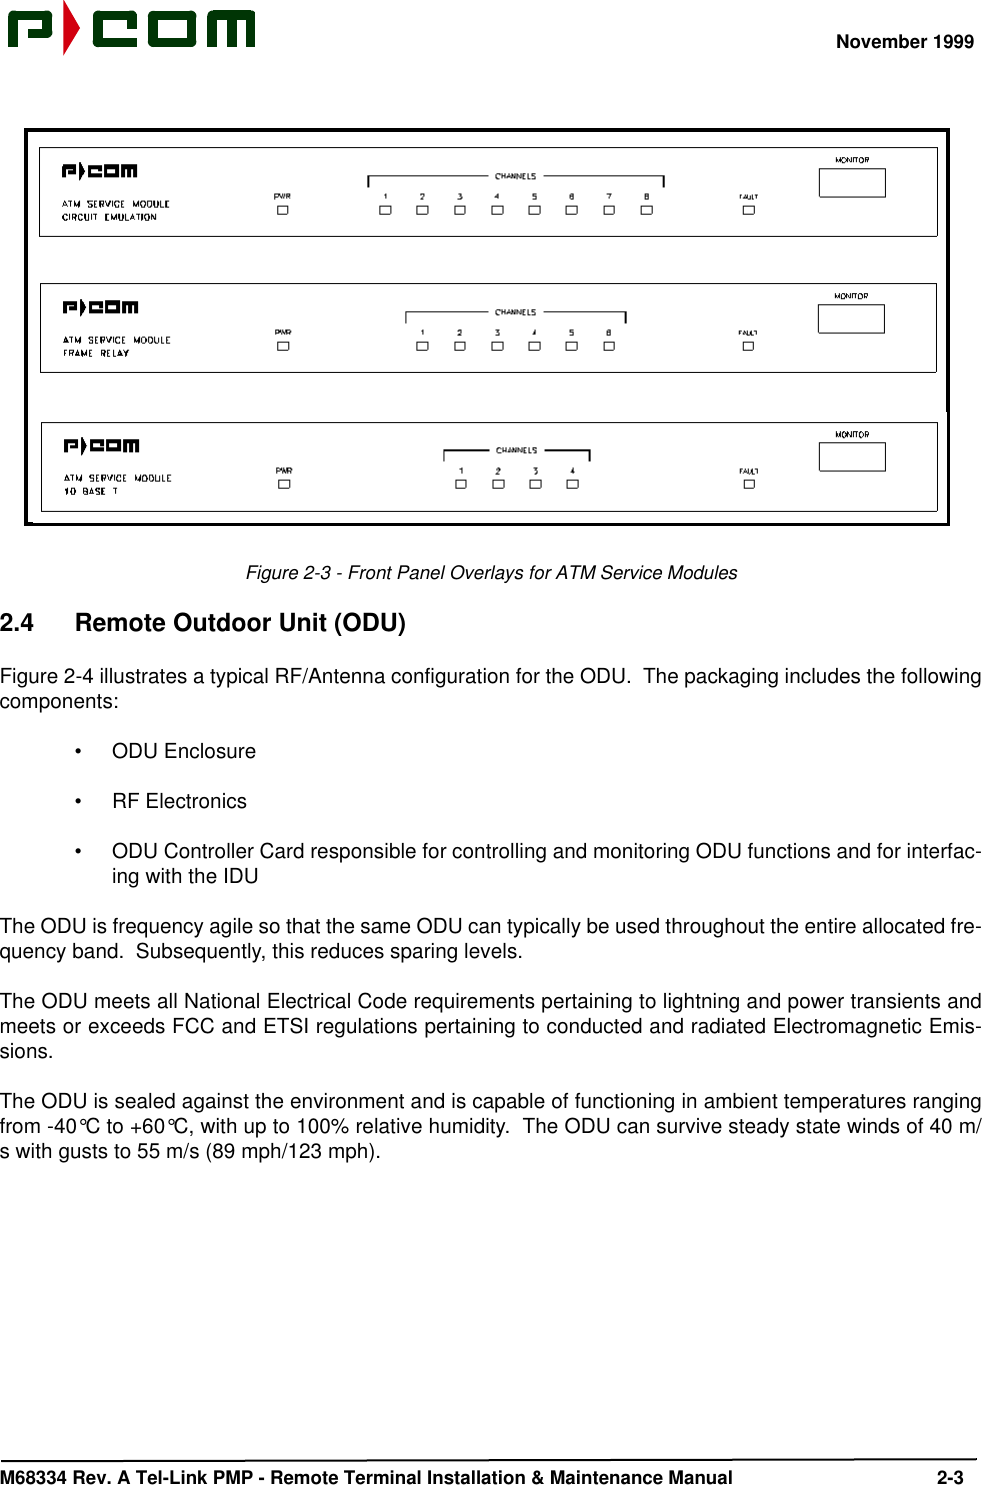 November 1999M68334 Rev. A Tel-Link PMP - Remote Terminal Installation &amp; Maintenance Manual 2-3 Figure 2-3 - Front Panel Overlays for ATM Service Modules2.4 Remote Outdoor Unit (ODU)Figure 2-4 illustrates a typical RF/Antenna configuration for the ODU.  The packaging includes the followingcomponents:•ODU Enclosure•RF Electronics•ODU Controller Card responsible for controlling and monitoring ODU functions and for interfac-ing with the IDUThe ODU is frequency agile so that the same ODU can typically be used throughout the entire allocated fre-quency band.  Subsequently, this reduces sparing levels.The ODU meets all National Electrical Code requirements pertaining to lightning and power transients andmeets or exceeds FCC and ETSI regulations pertaining to conducted and radiated Electromagnetic Emis-sions.The ODU is sealed against the environment and is capable of functioning in ambient temperatures rangingfrom -40°C to +60°C, with up to 100% relative humidity.  The ODU can survive steady state winds of 40 m/s with gusts to 55 m/s (89 mph/123 mph).